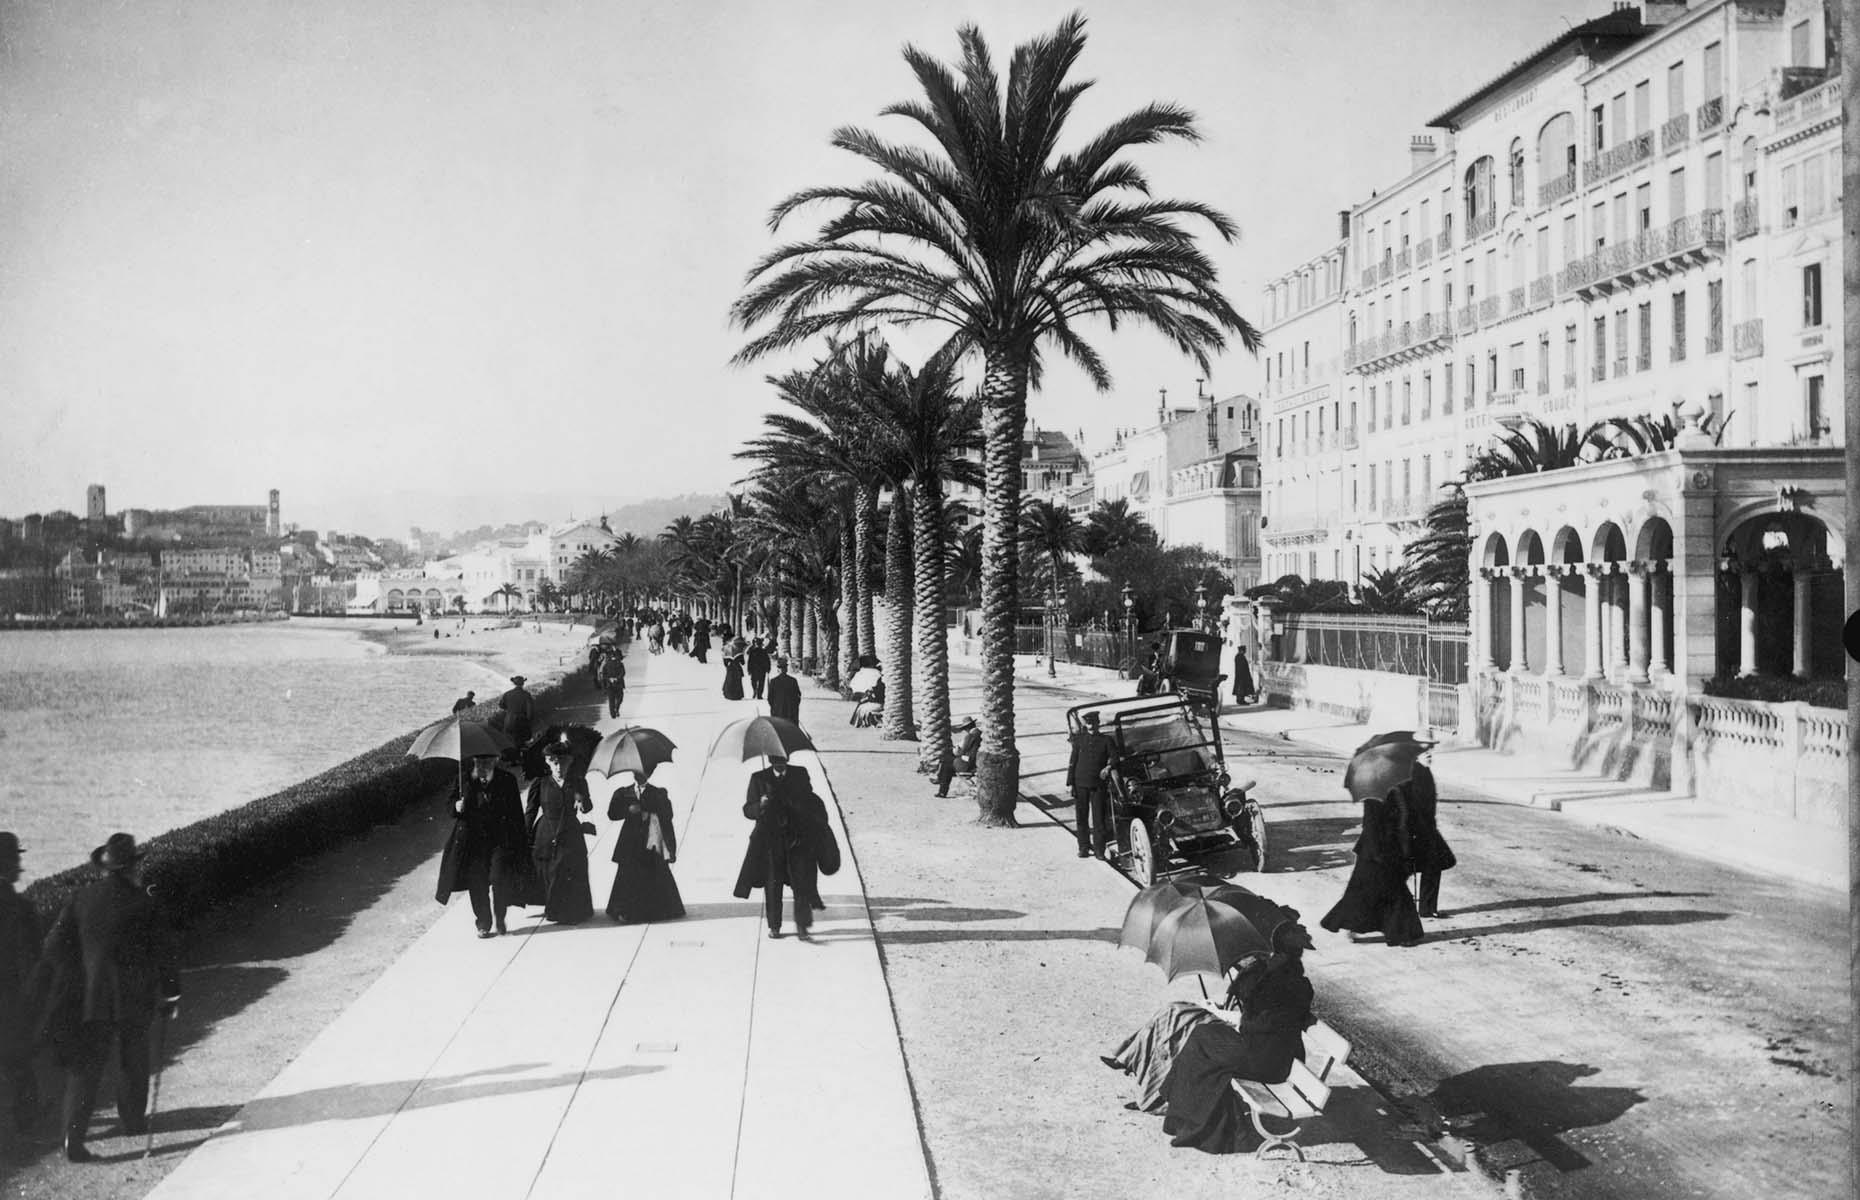 <p>Côte d'Azur, or the French Riviera, covers most of the French Mediterranean coastline and the end of the 18th century saw the region develop into a fashionable health resort and vacation destination for the British upper classes. Many notable Brits were among regular visitors, including Queen Victoria and Edward VII (then Prince of Wales). By the turn of the 20th century, a summer escape to Côte d'Azur was a must among the wealthy. Here, people are seen wandering beneath the palm trees of Boulevard de la Croisette in Cannes in the early 1900s.</p>